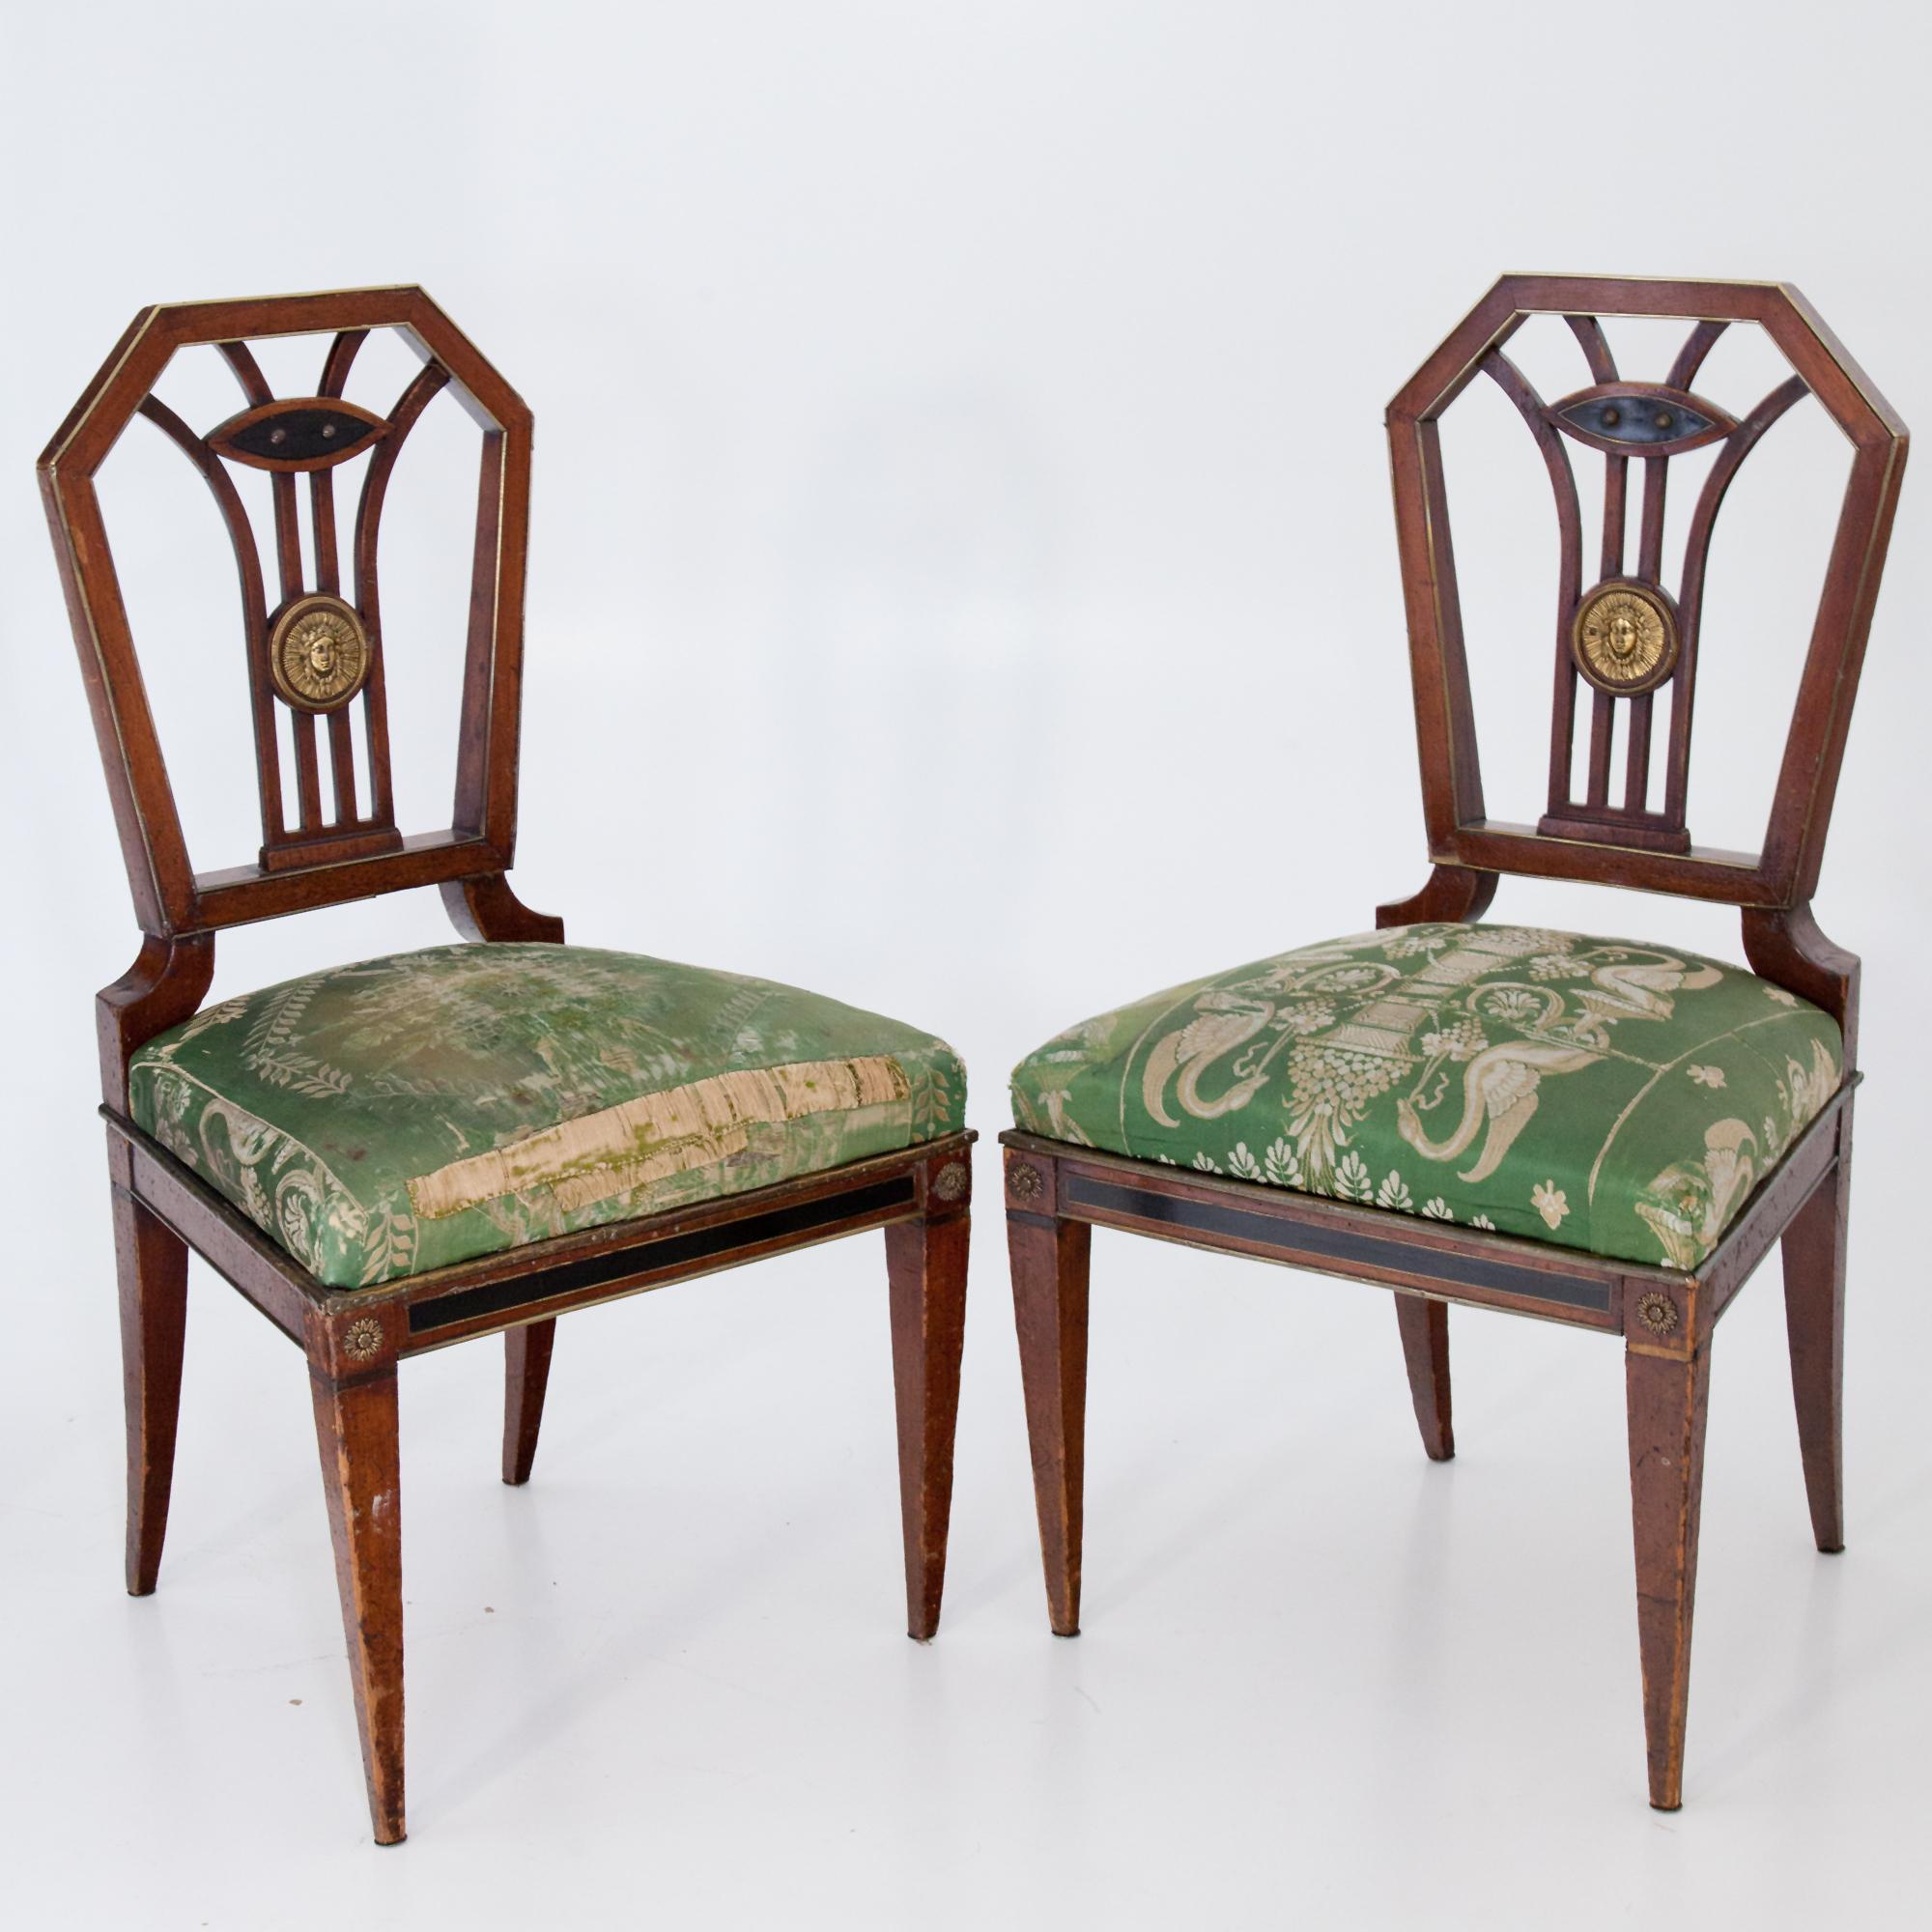 Two Empire chairs in museum quality, probably by Gottlieb August Pohle, Vienna, circa 1805-1810. Mahogany frame with brass applications and rung backrests. Partly original wallpapering.